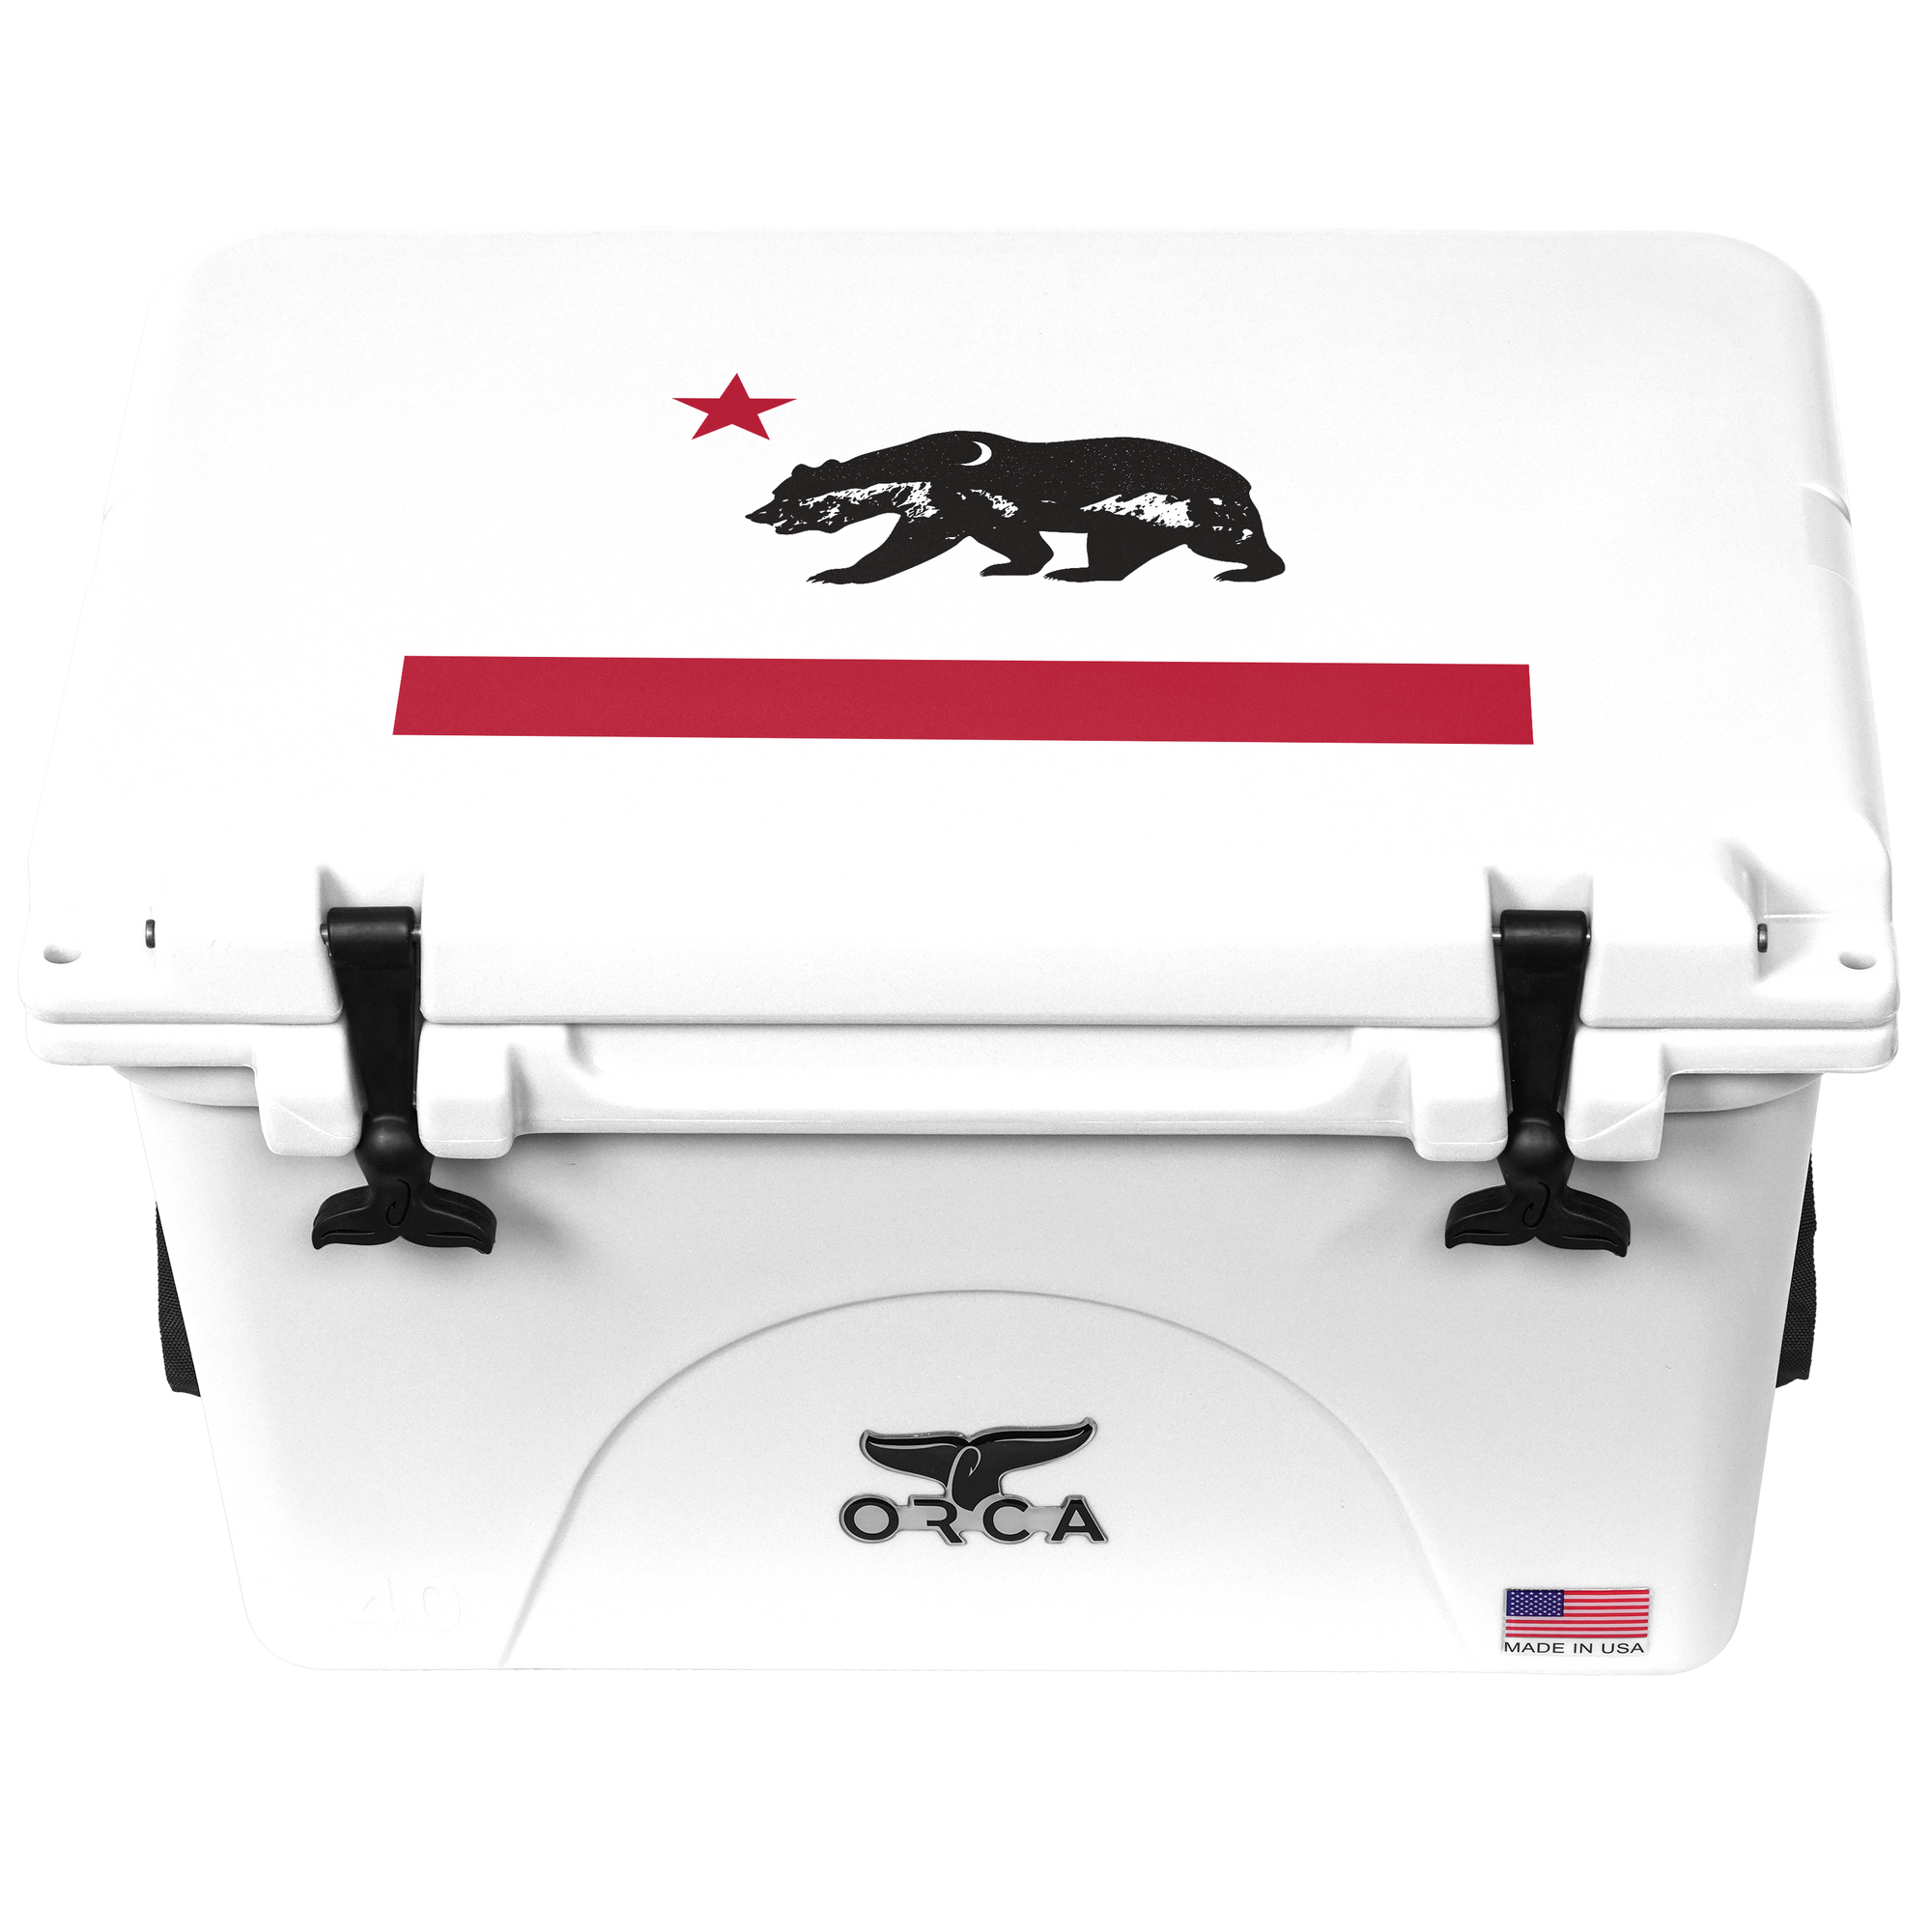 California State Pride 40 Quart Cooler by ORCA